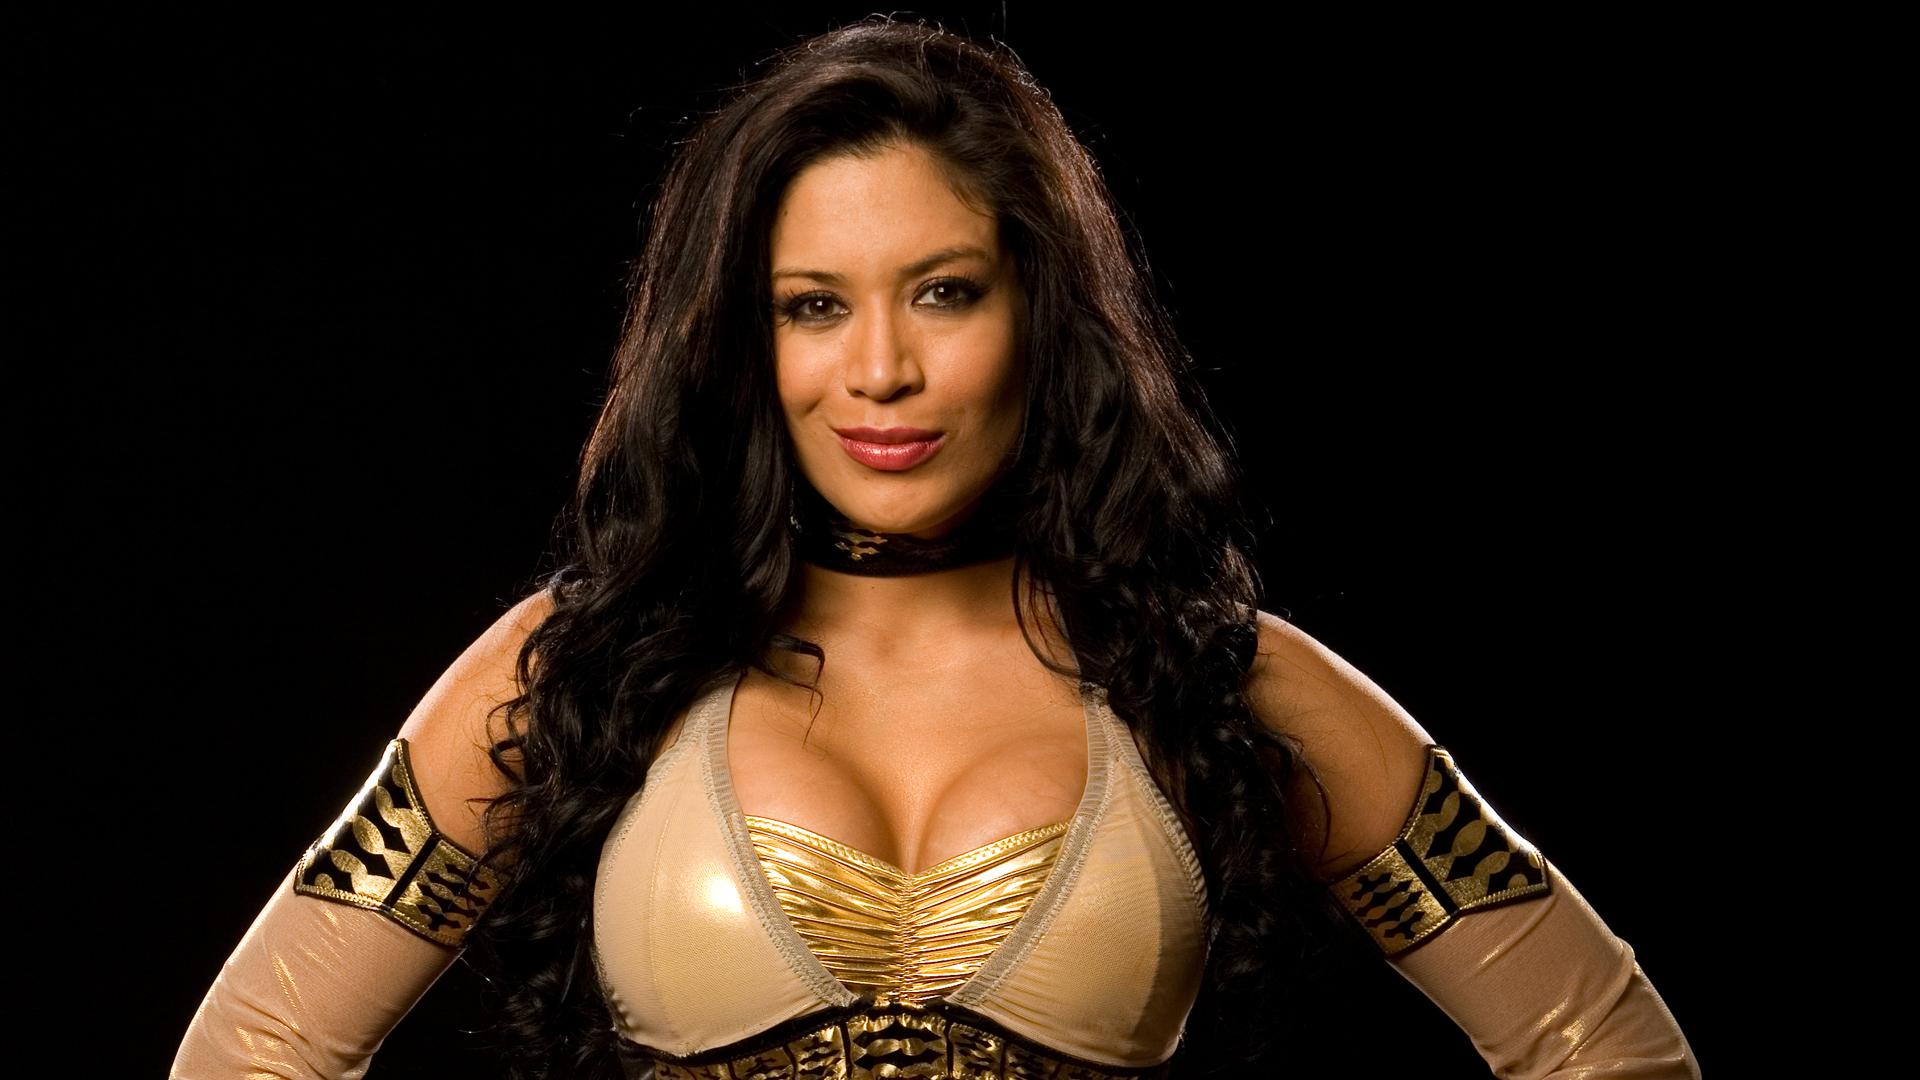 65+ Hot Pictures Of Melina Perez The WWE Diva Will Drive You Insane For Her | Best Of Comic Books